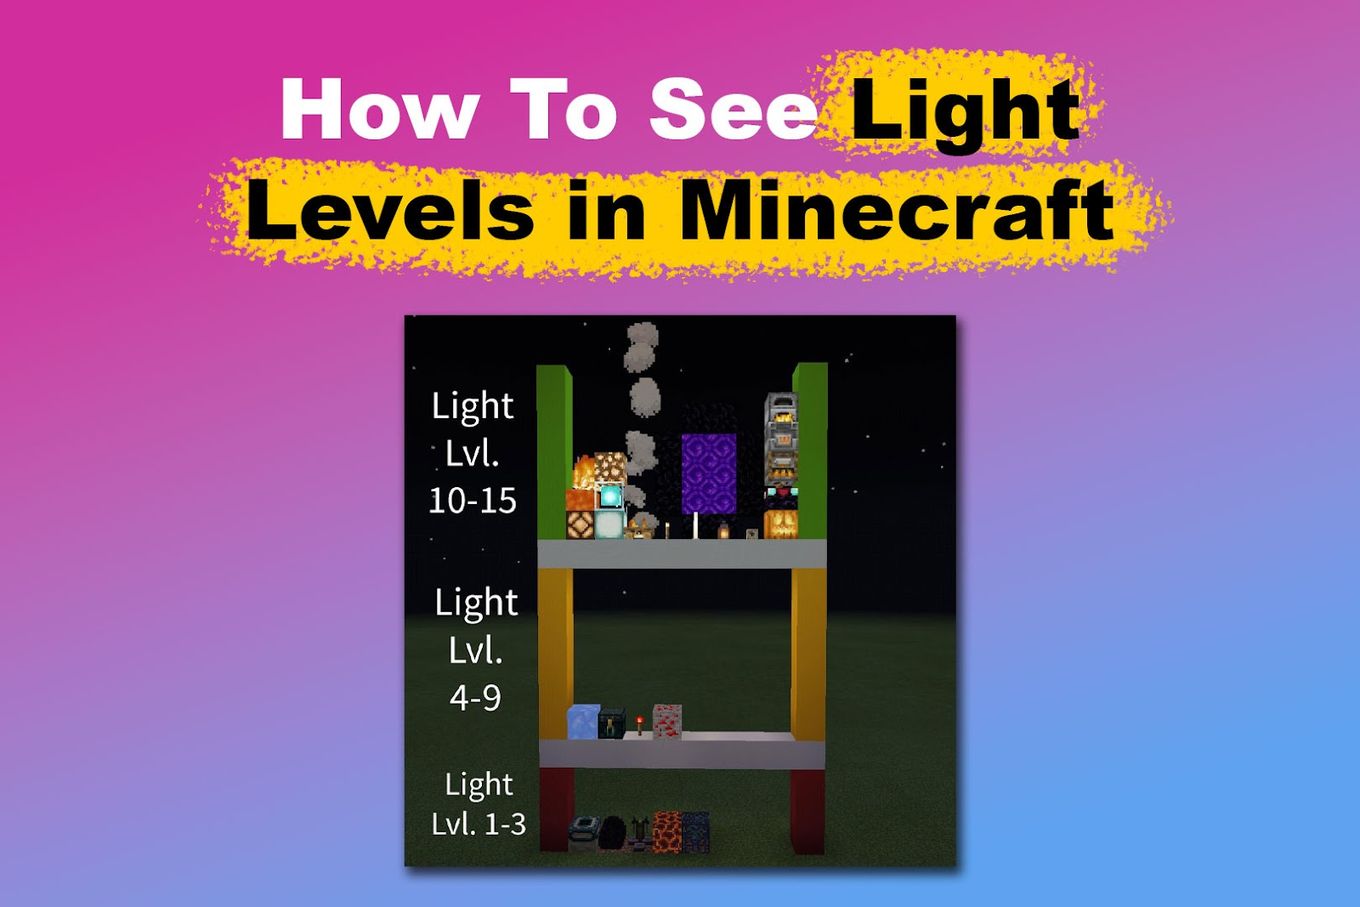 How To See Light Levels in Minecraft